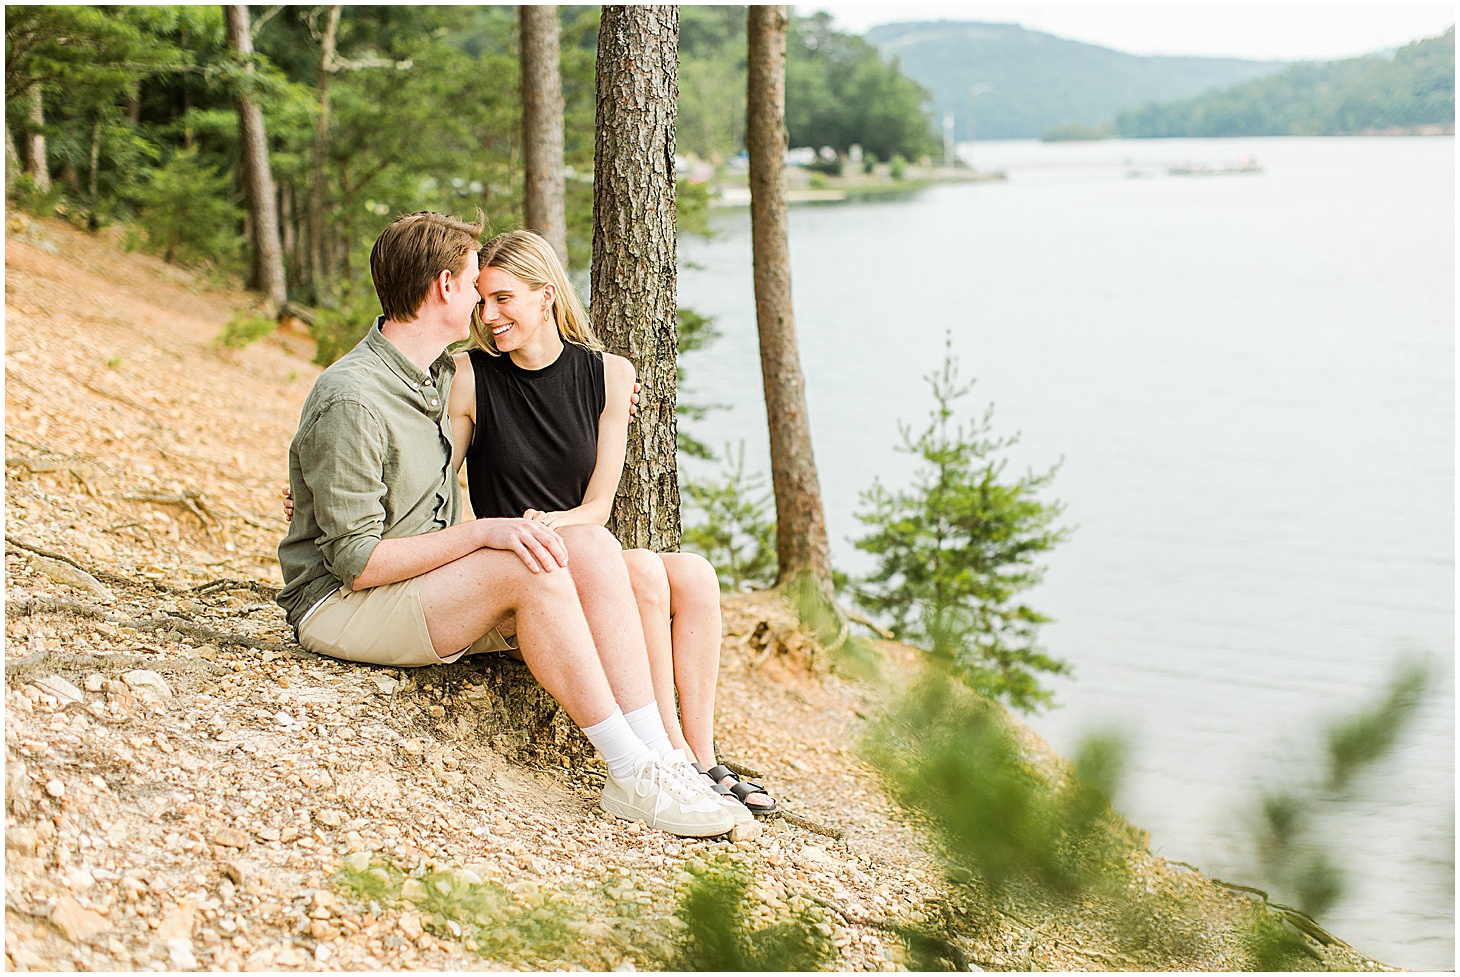 carvinscove_roanokeengagementsession_virginiaweddingphotographer_vaweddingphotographer_photo_0013-1.jpg